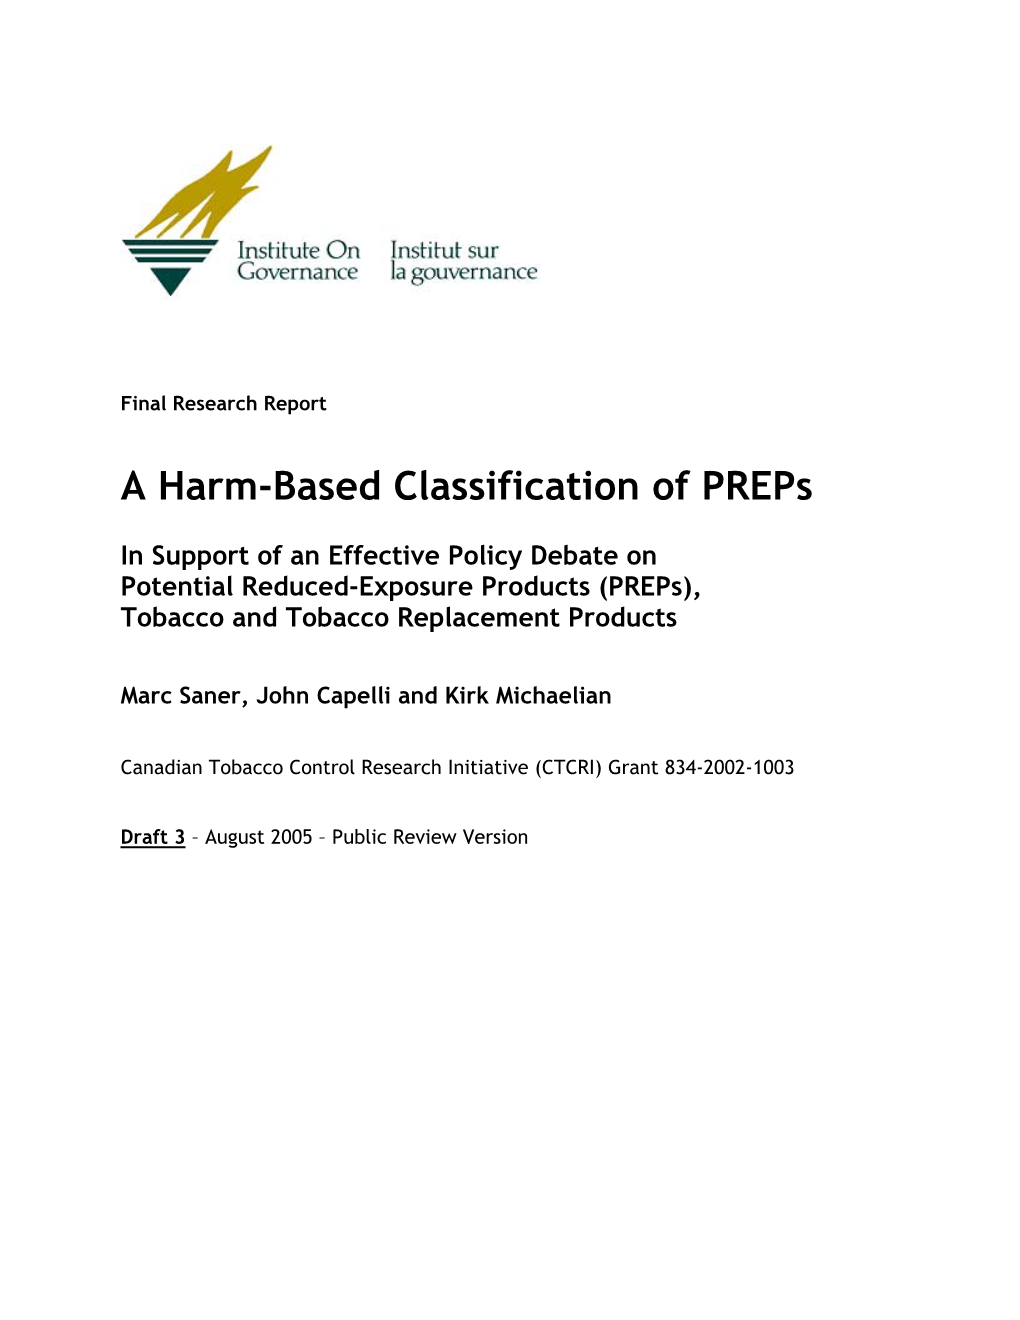 A Harm-Based Classification of Preps